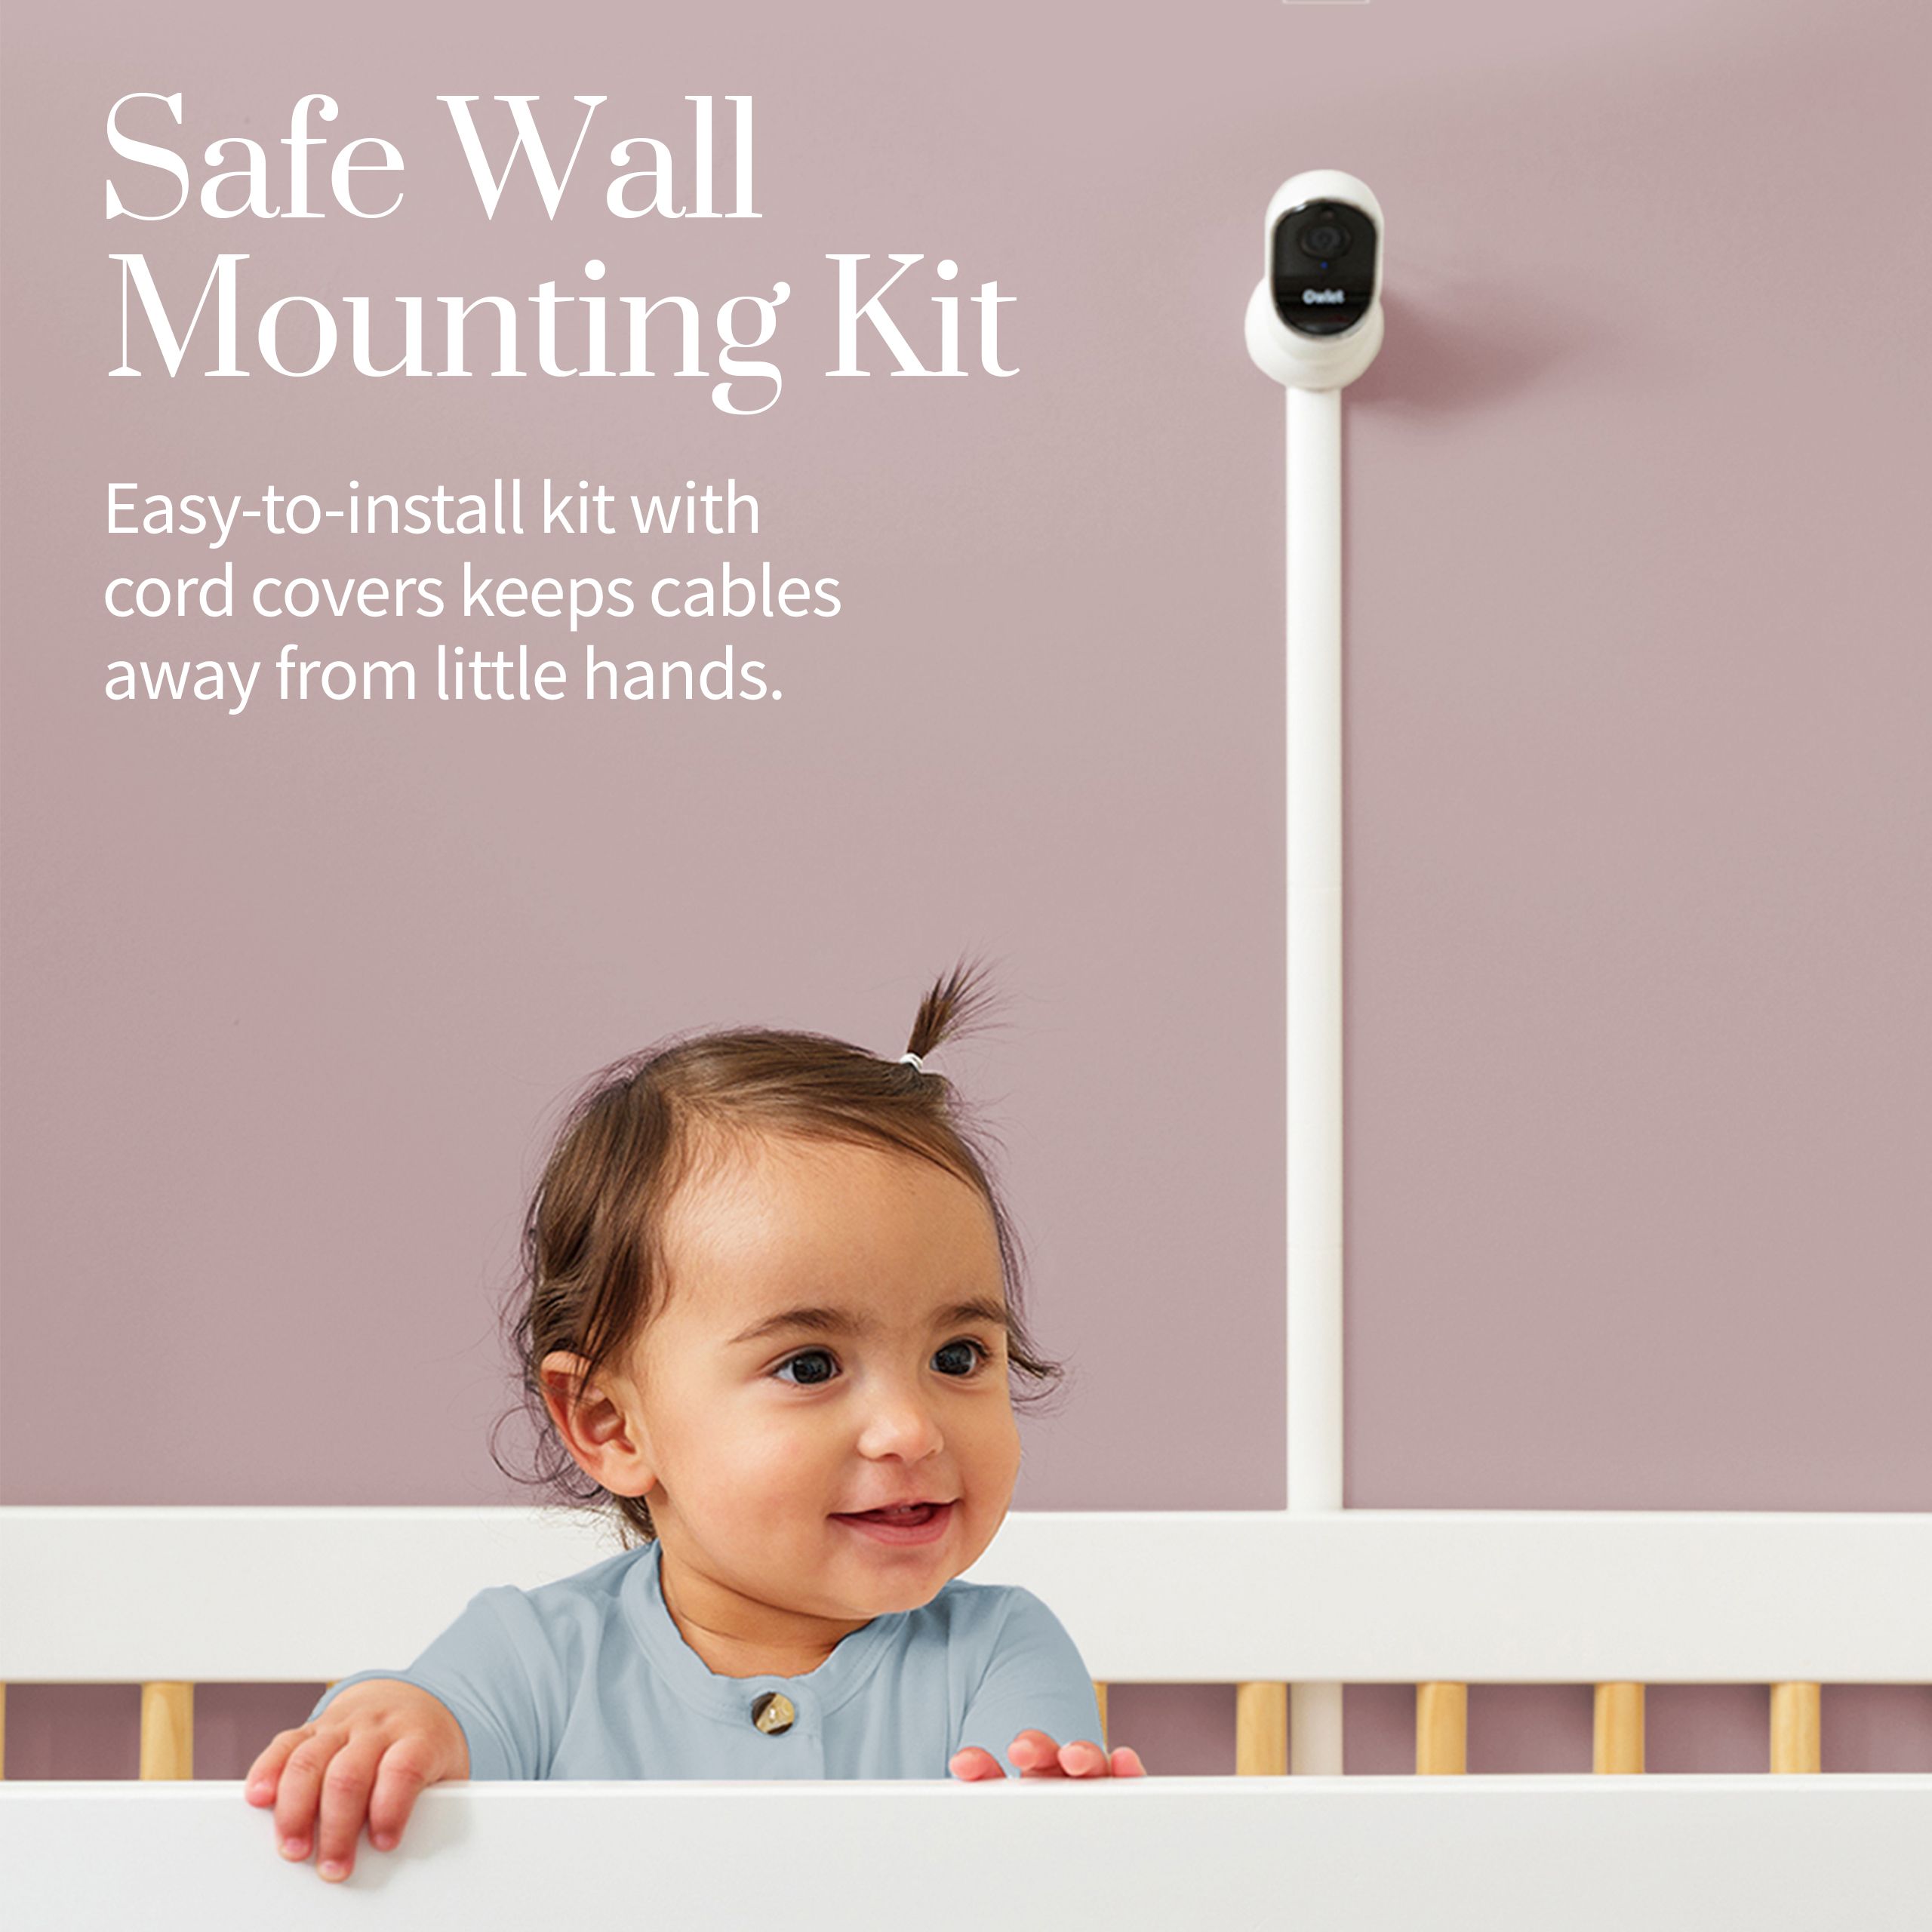 Owlet® Cam Smart Baby Monitor